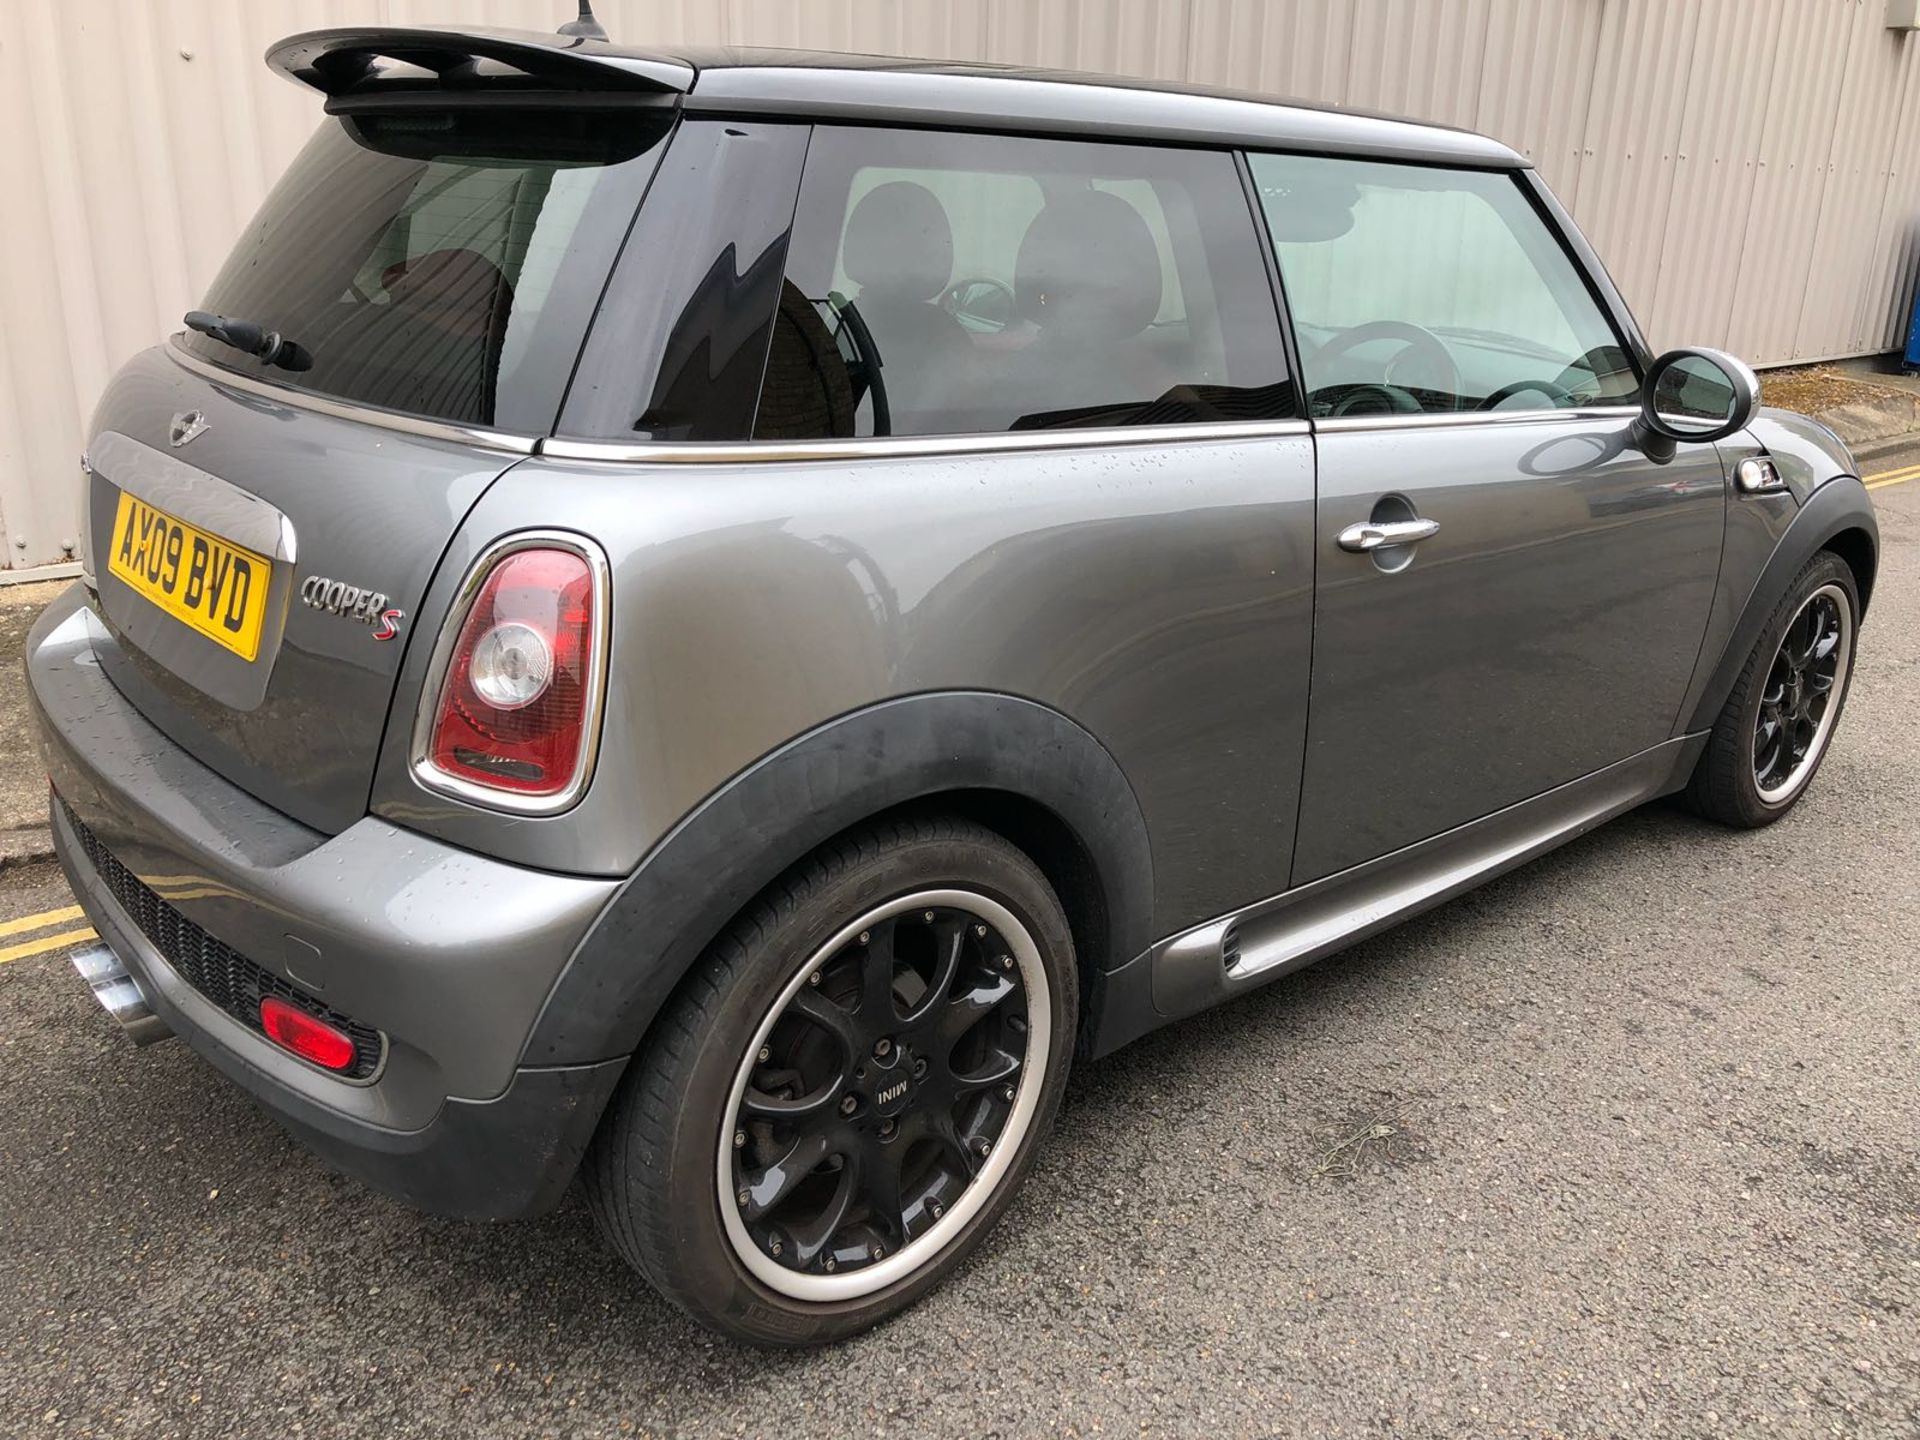 MINI COOPER S JOHN WORKS. 2009/09. 79,000 miles. Full history with 9 stamps in the book. - Image 3 of 19